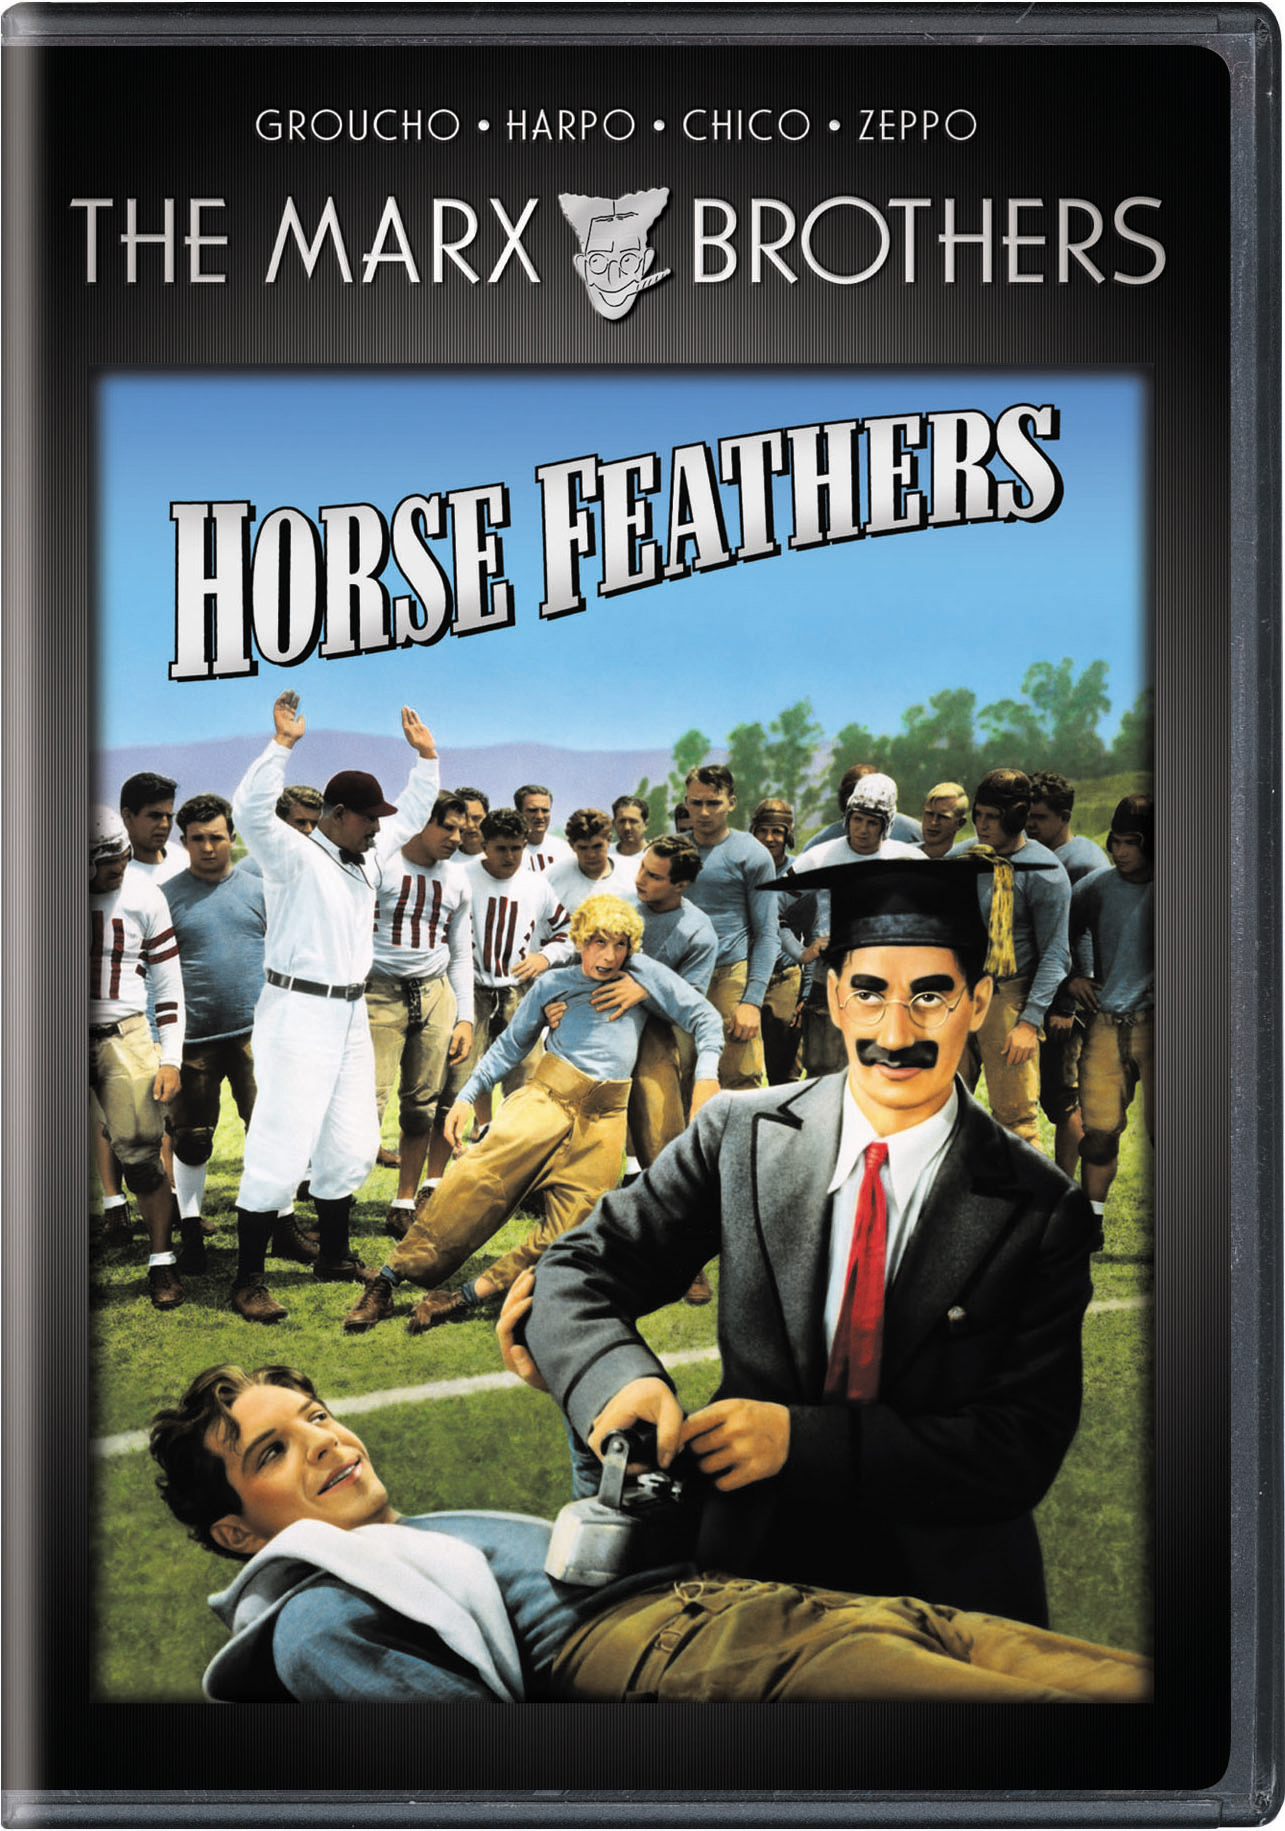 Horse Feathers - DVD [ 1932 ]  - Comedy Movies On DVD - Movies On GRUV